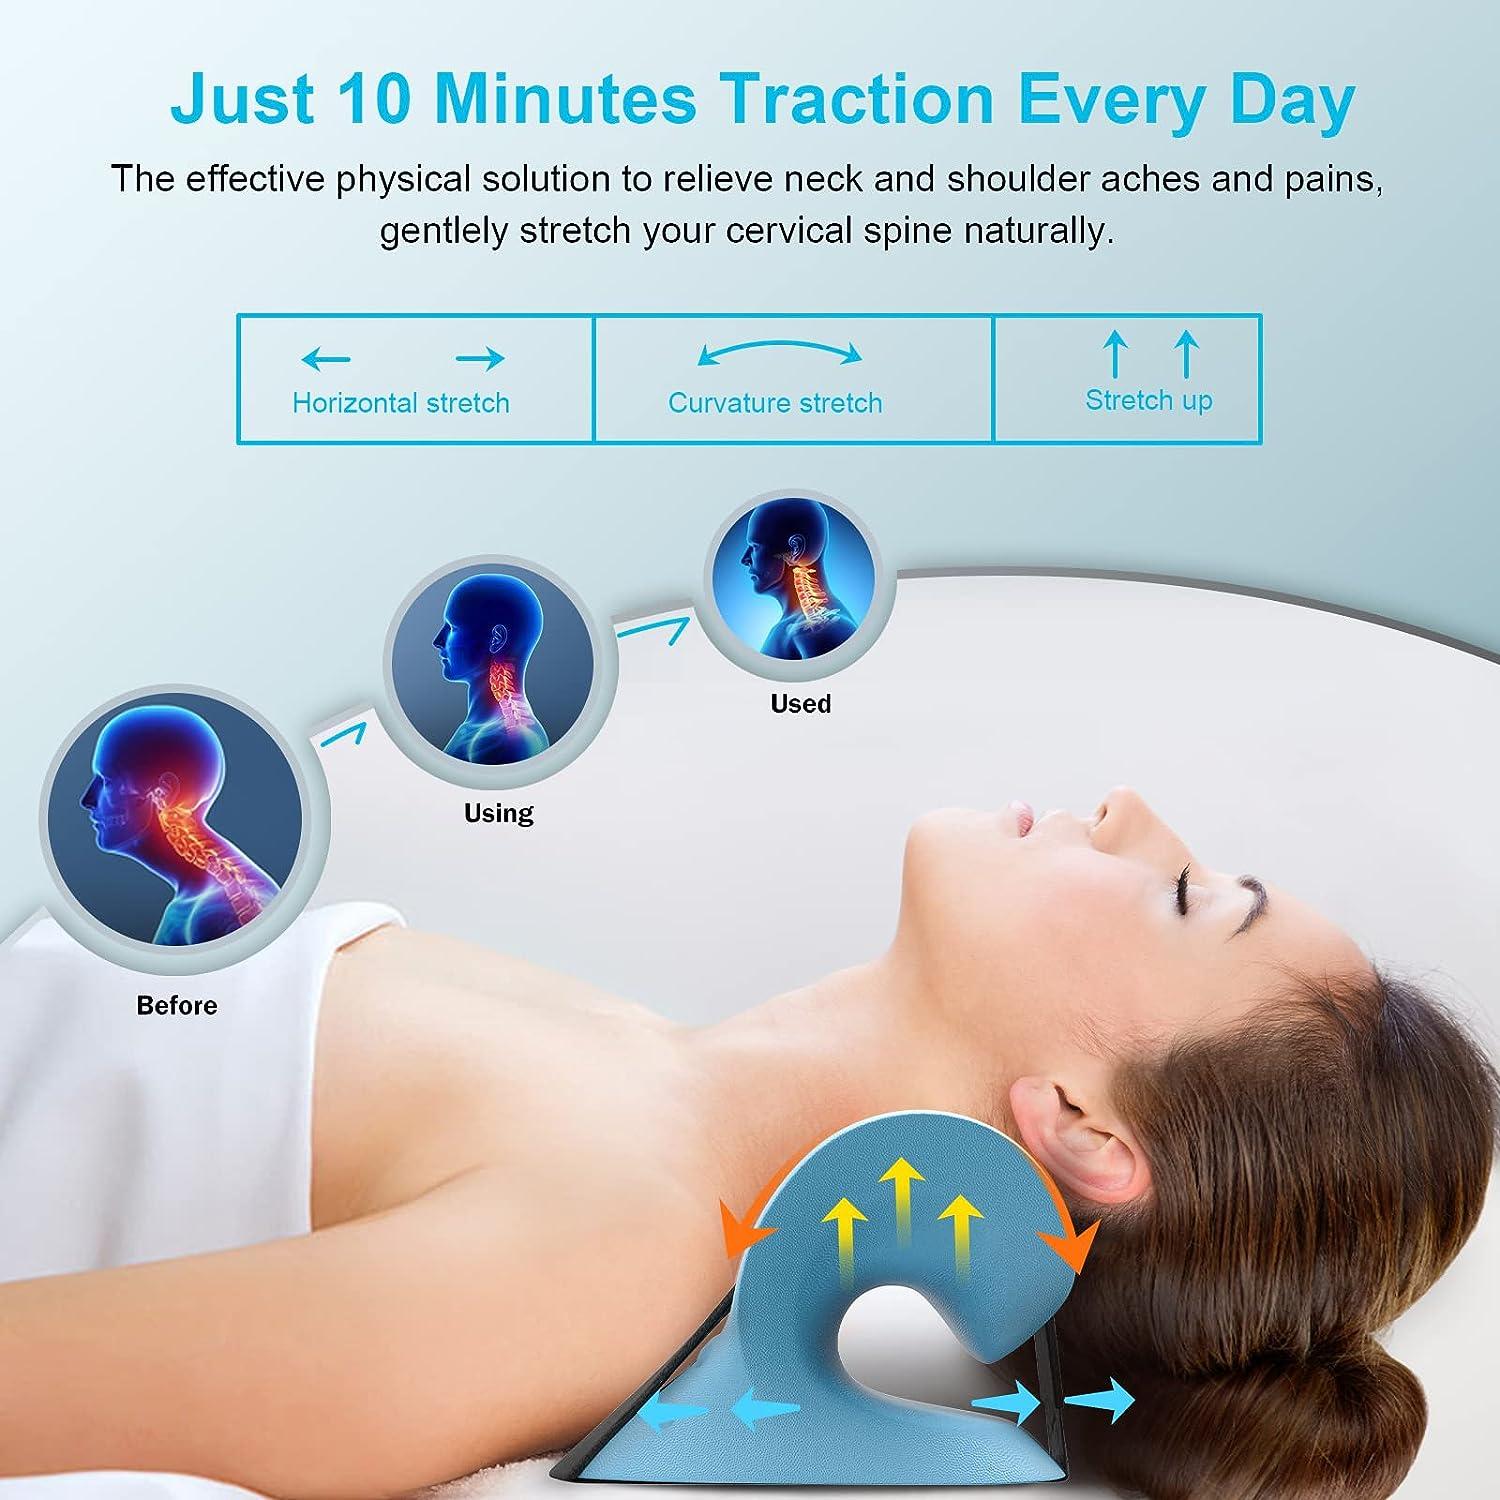 Fast Heated Neck Stretcher for Pain Relief, Neck Cloud Cervical